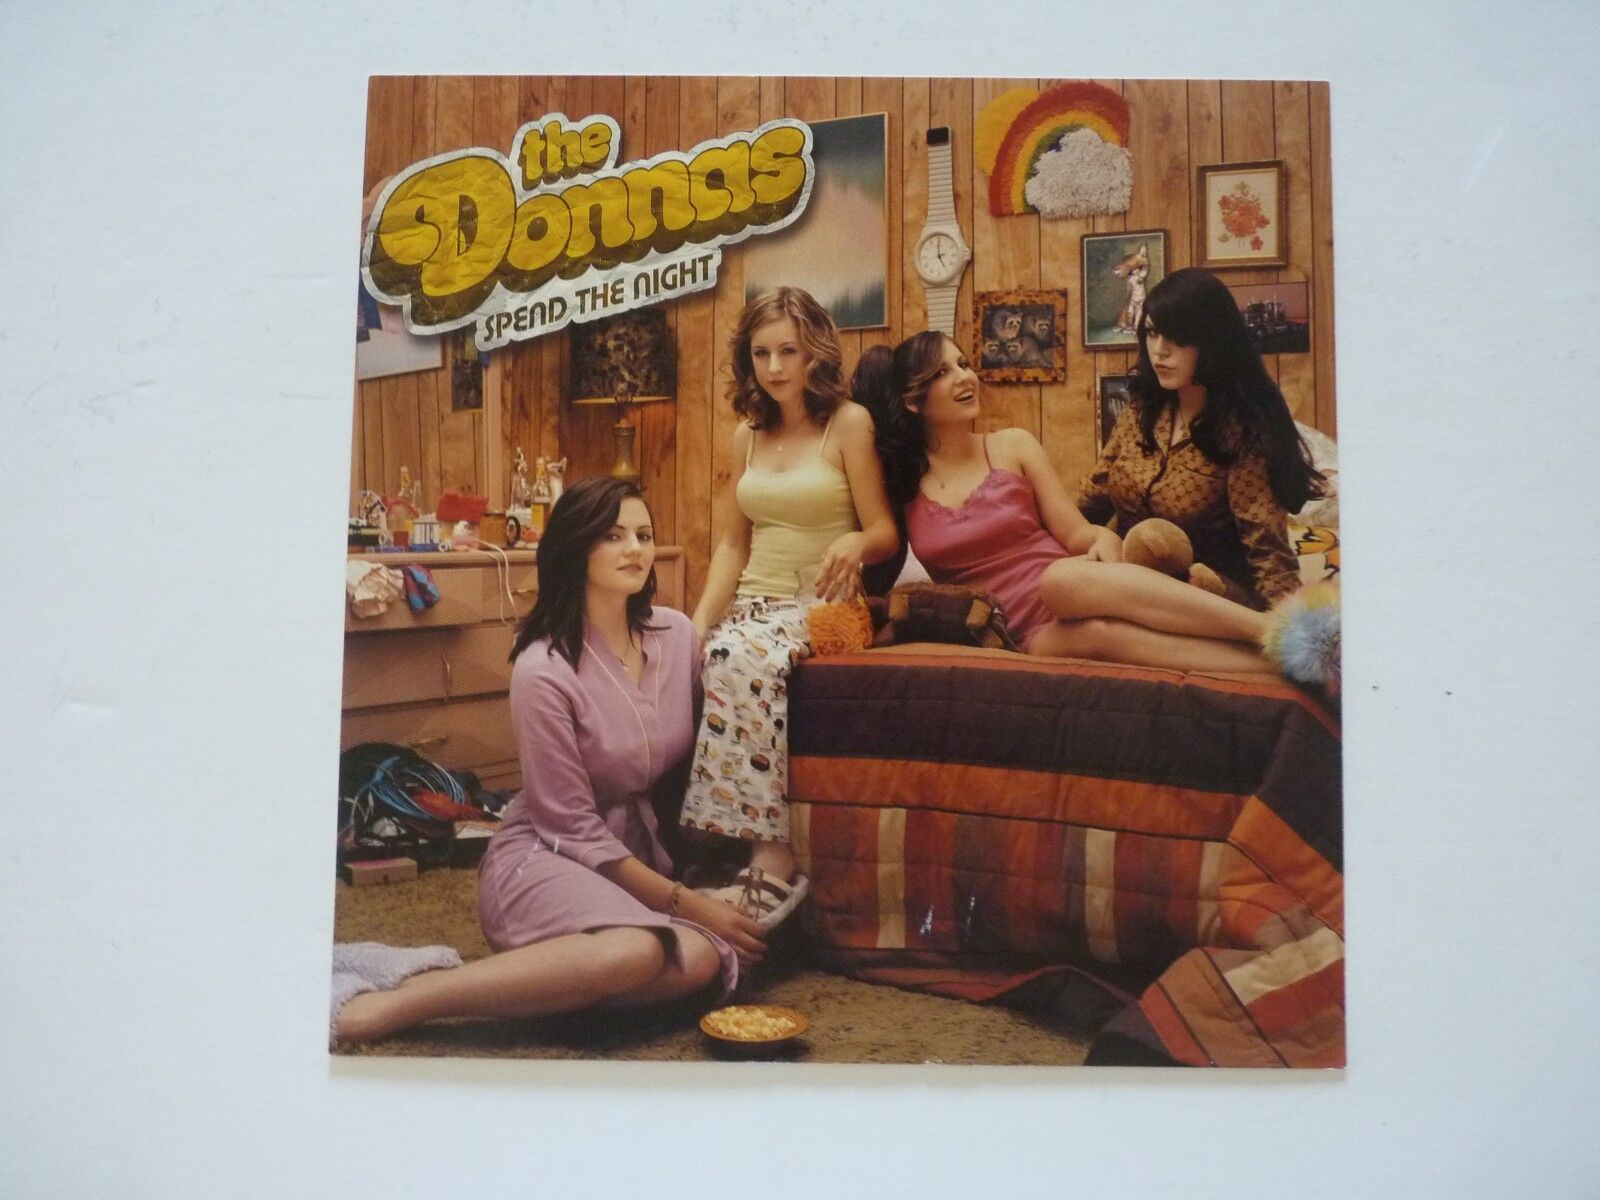 The Donnas Spend the Night LP Record Photo Poster painting Flat 12x12 Poster